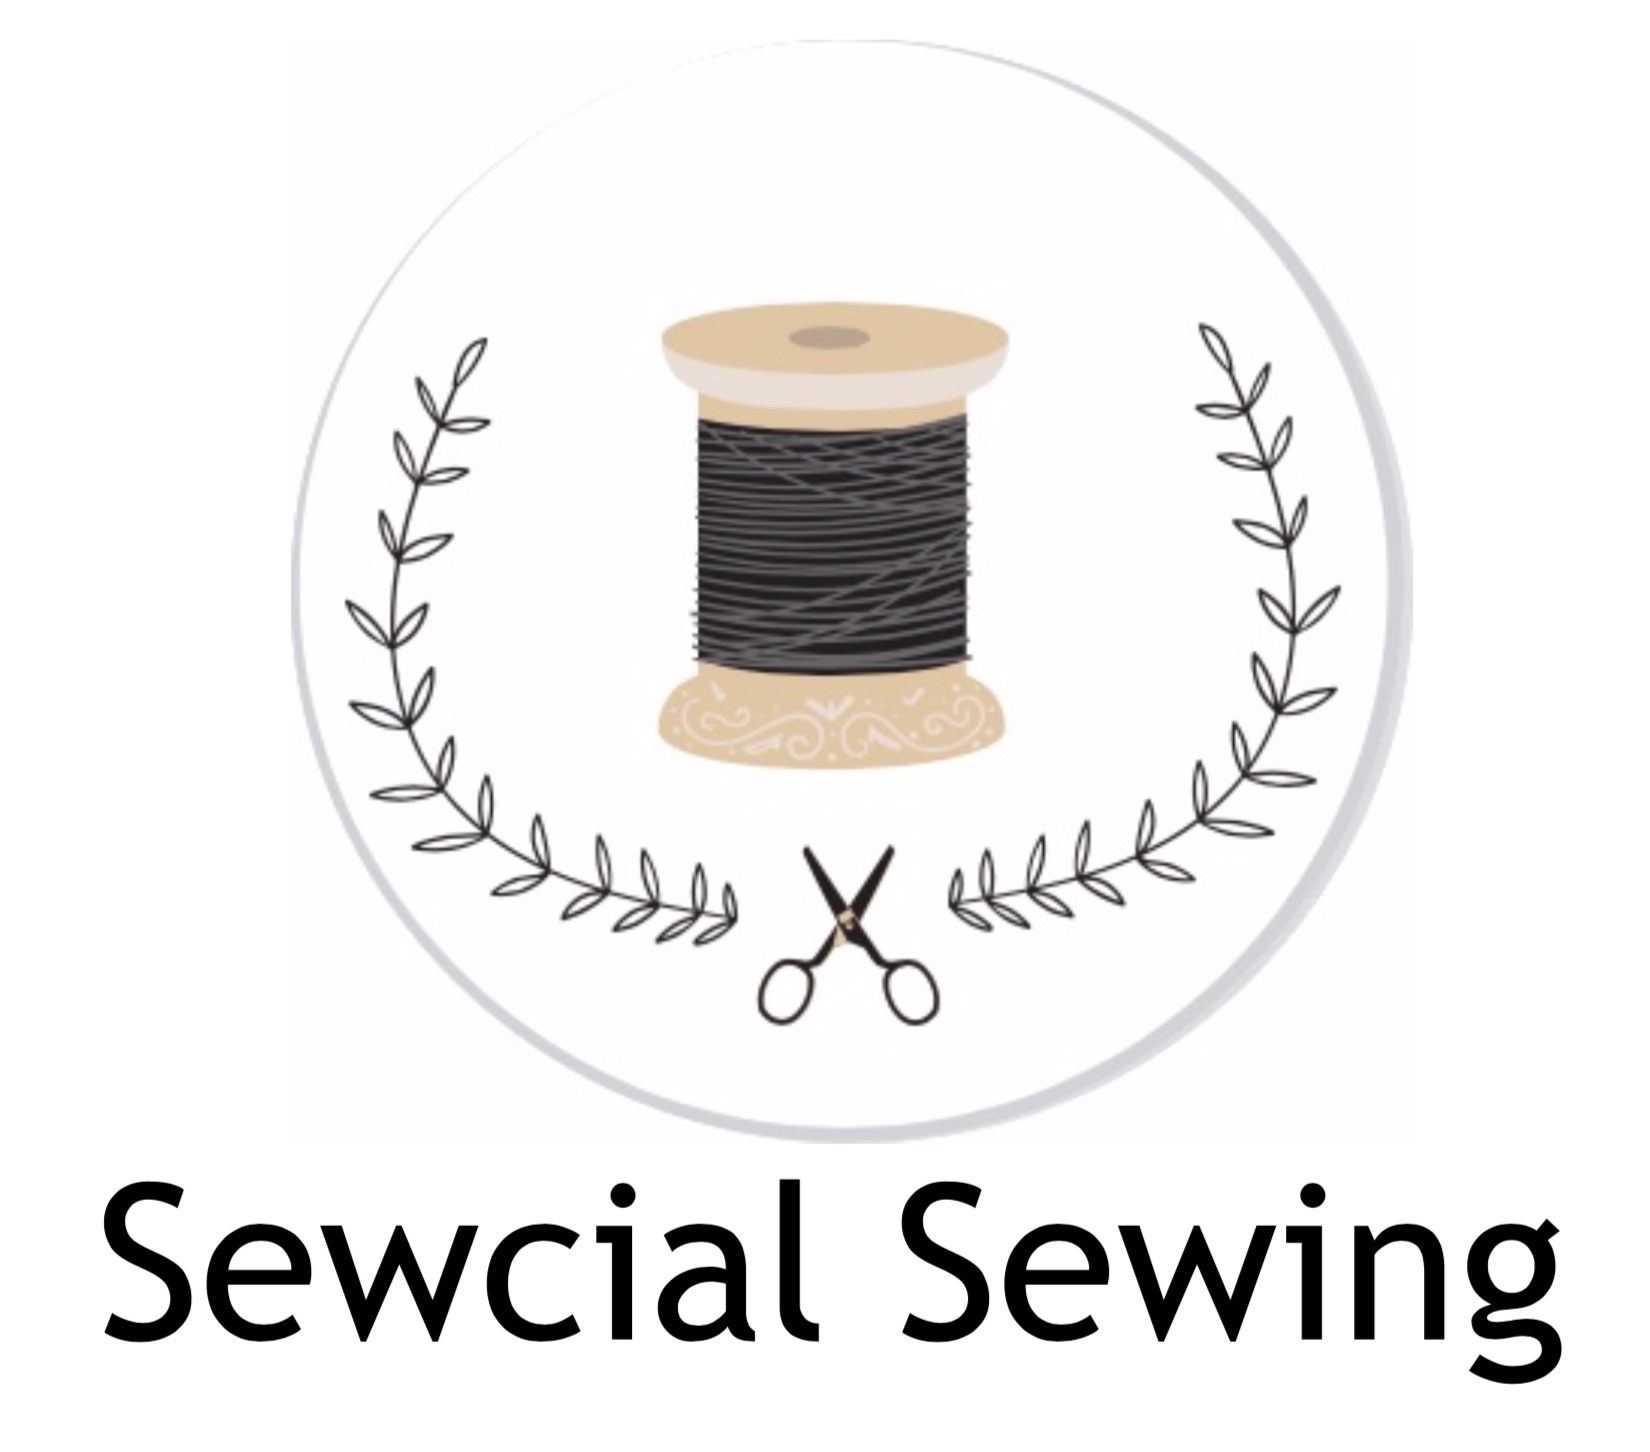 Sewcial Sewing™